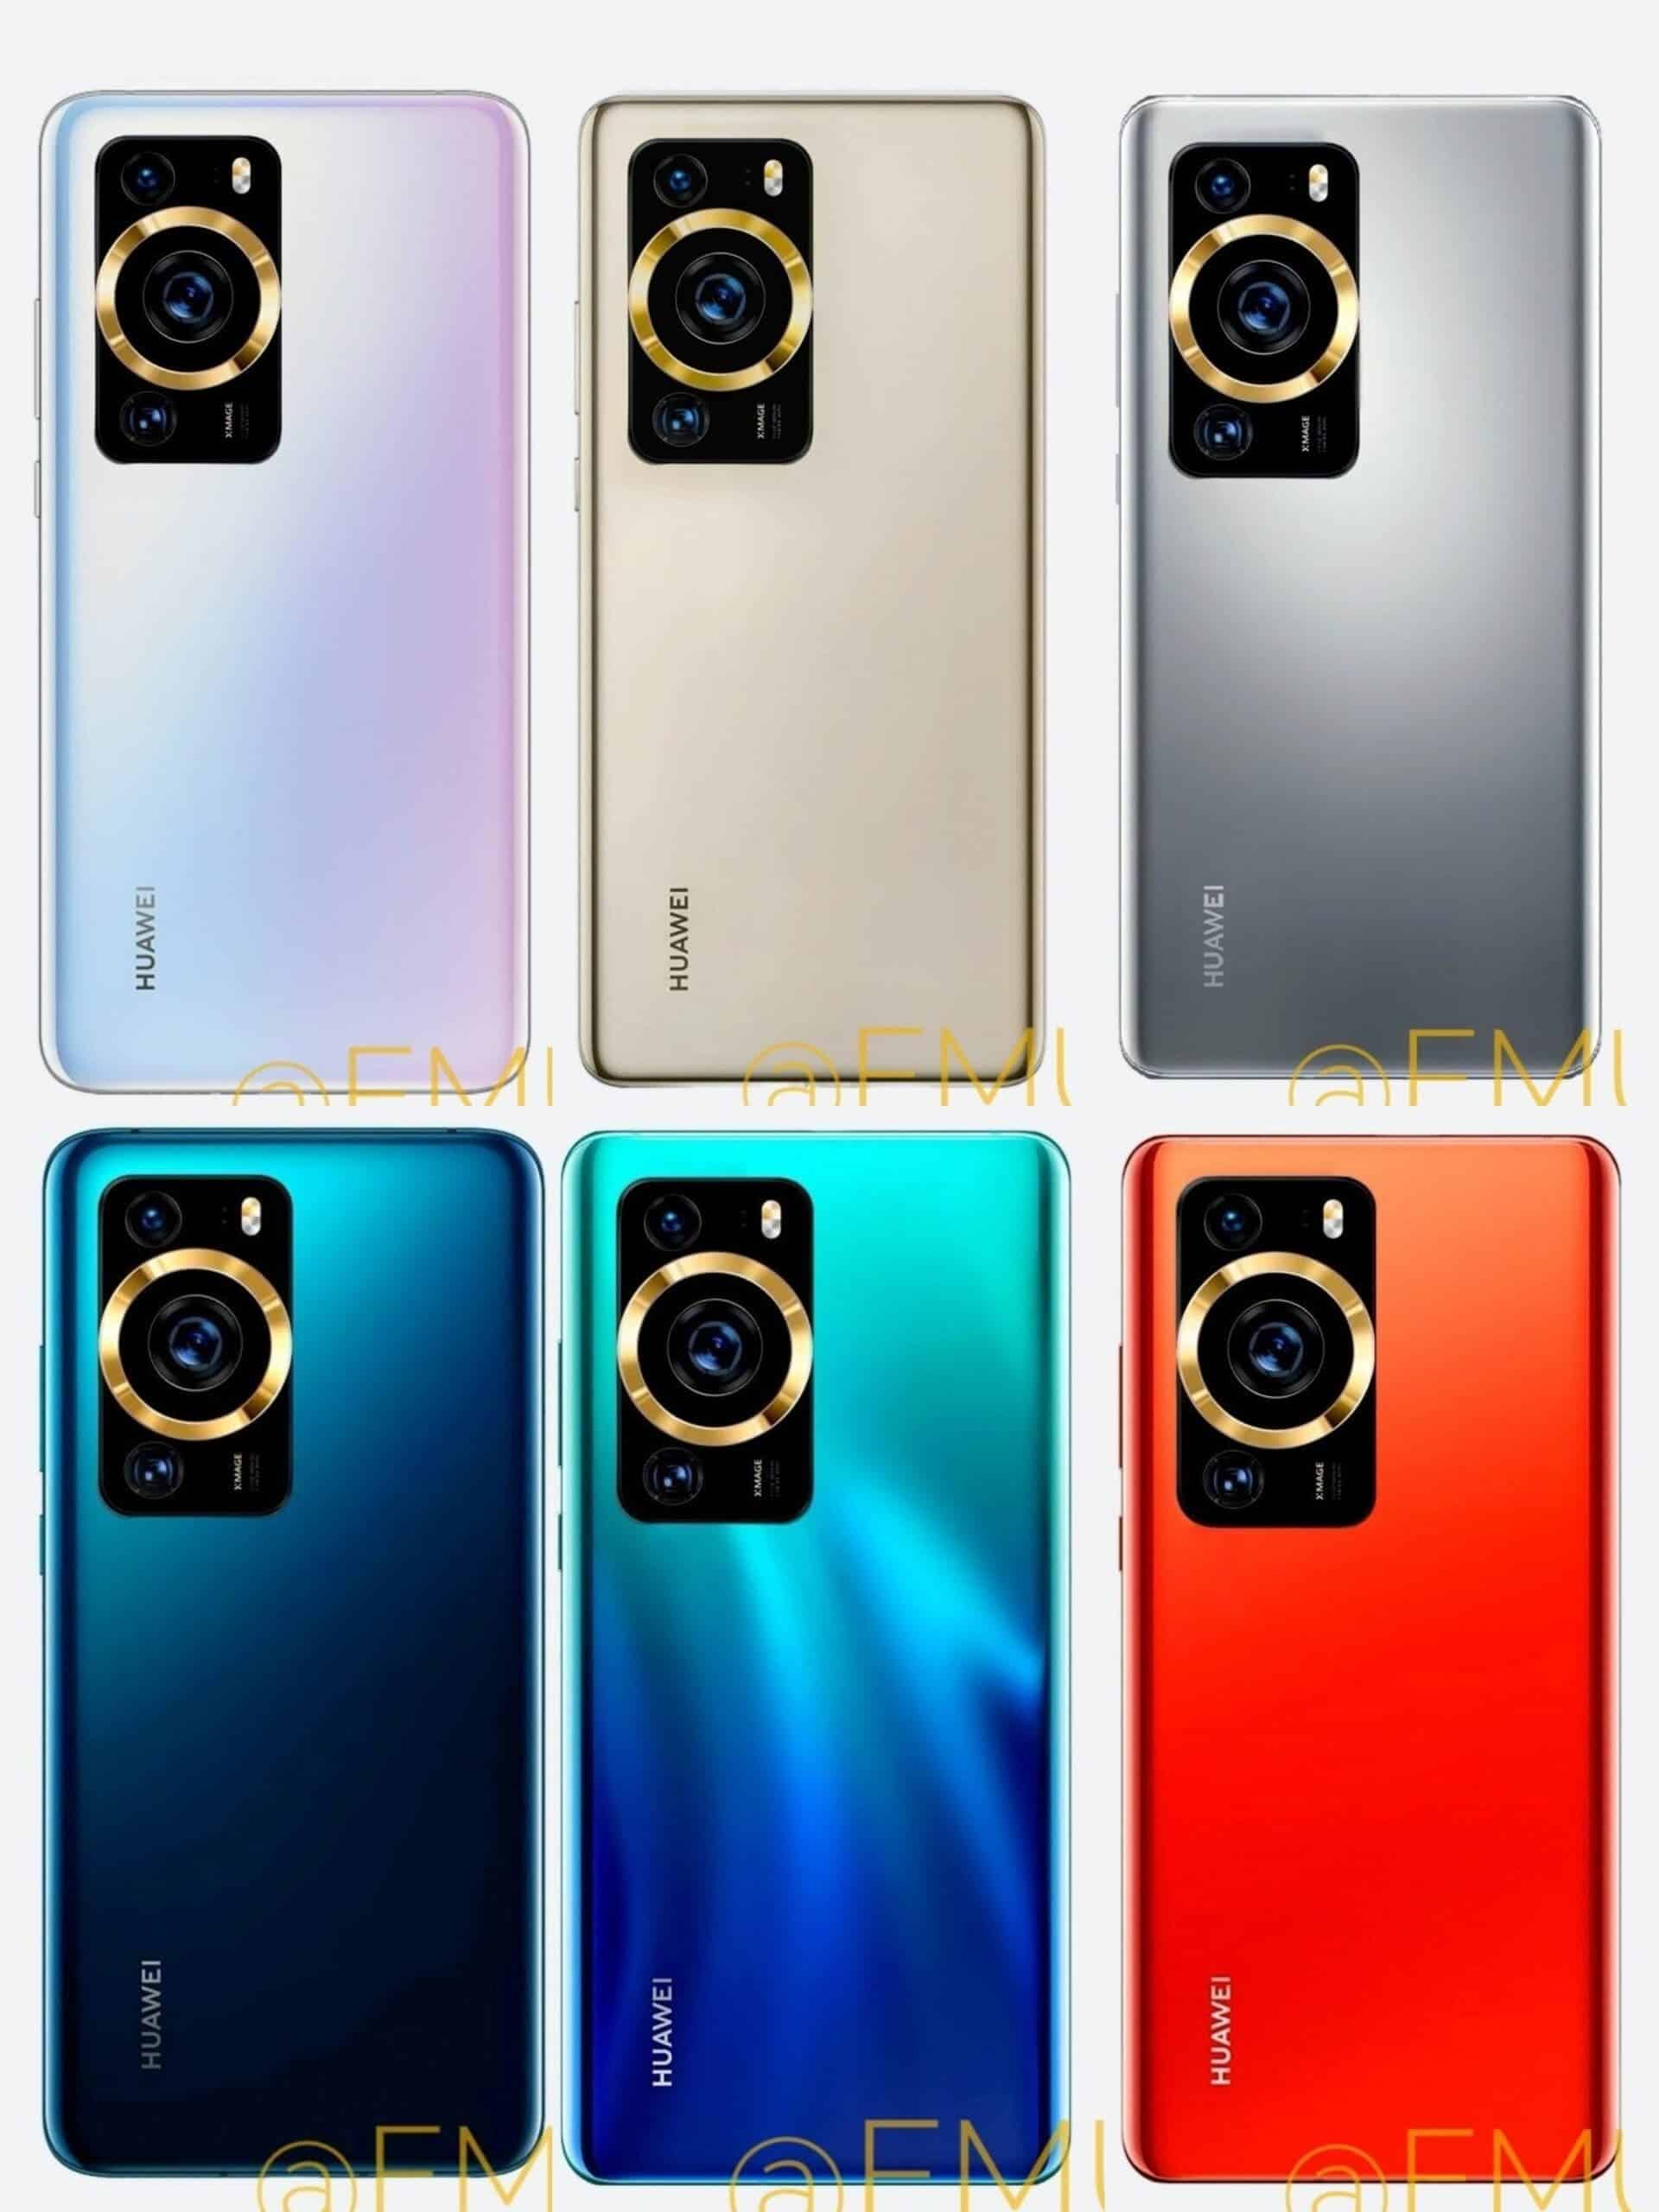 New Huawei P60 Pro leaked specs suggest Snapdragon 8 Gen 2 chipset -   news